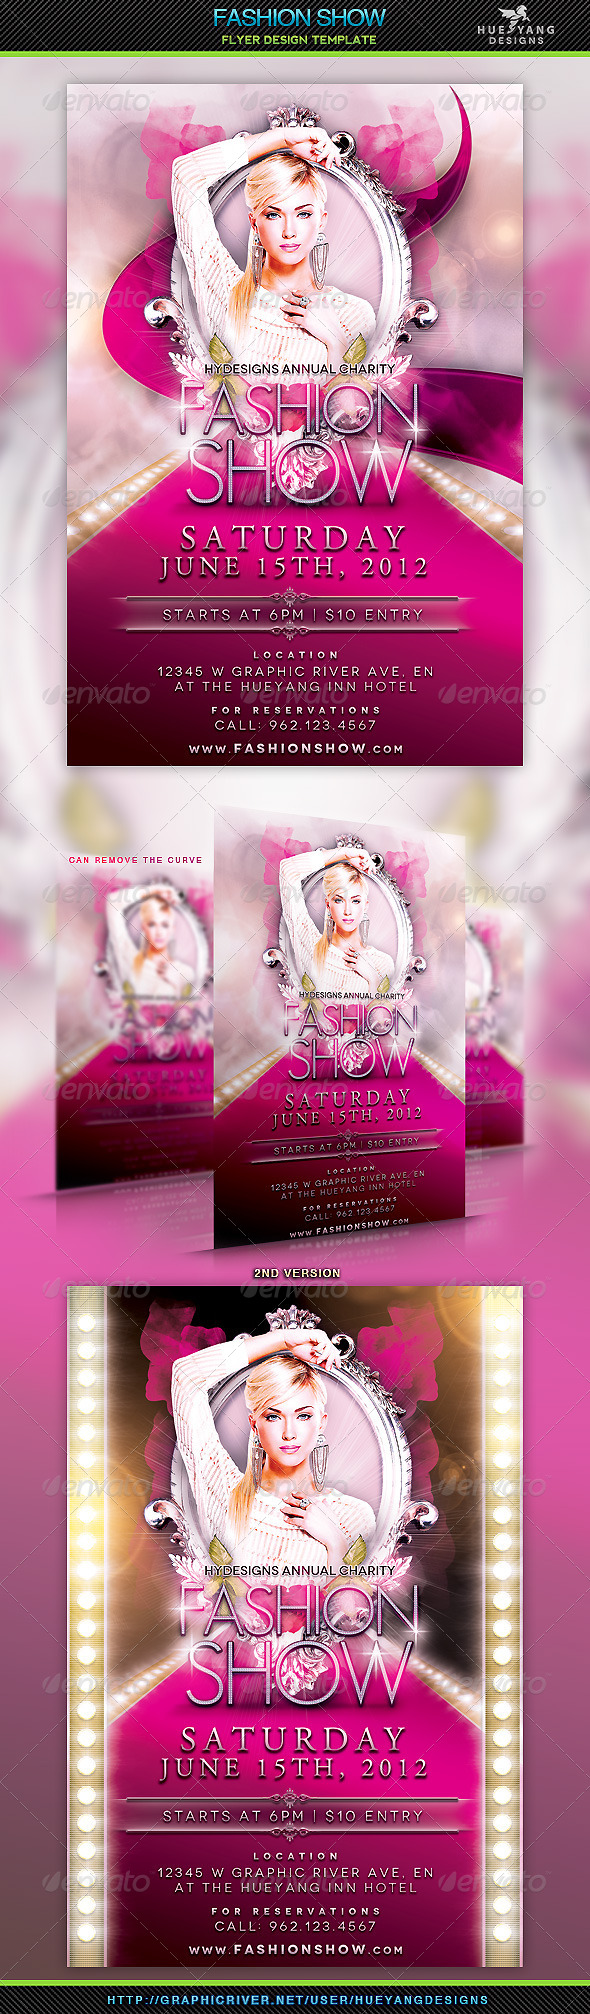 Fashion Show Flyer Template to Print - Creative Flyers